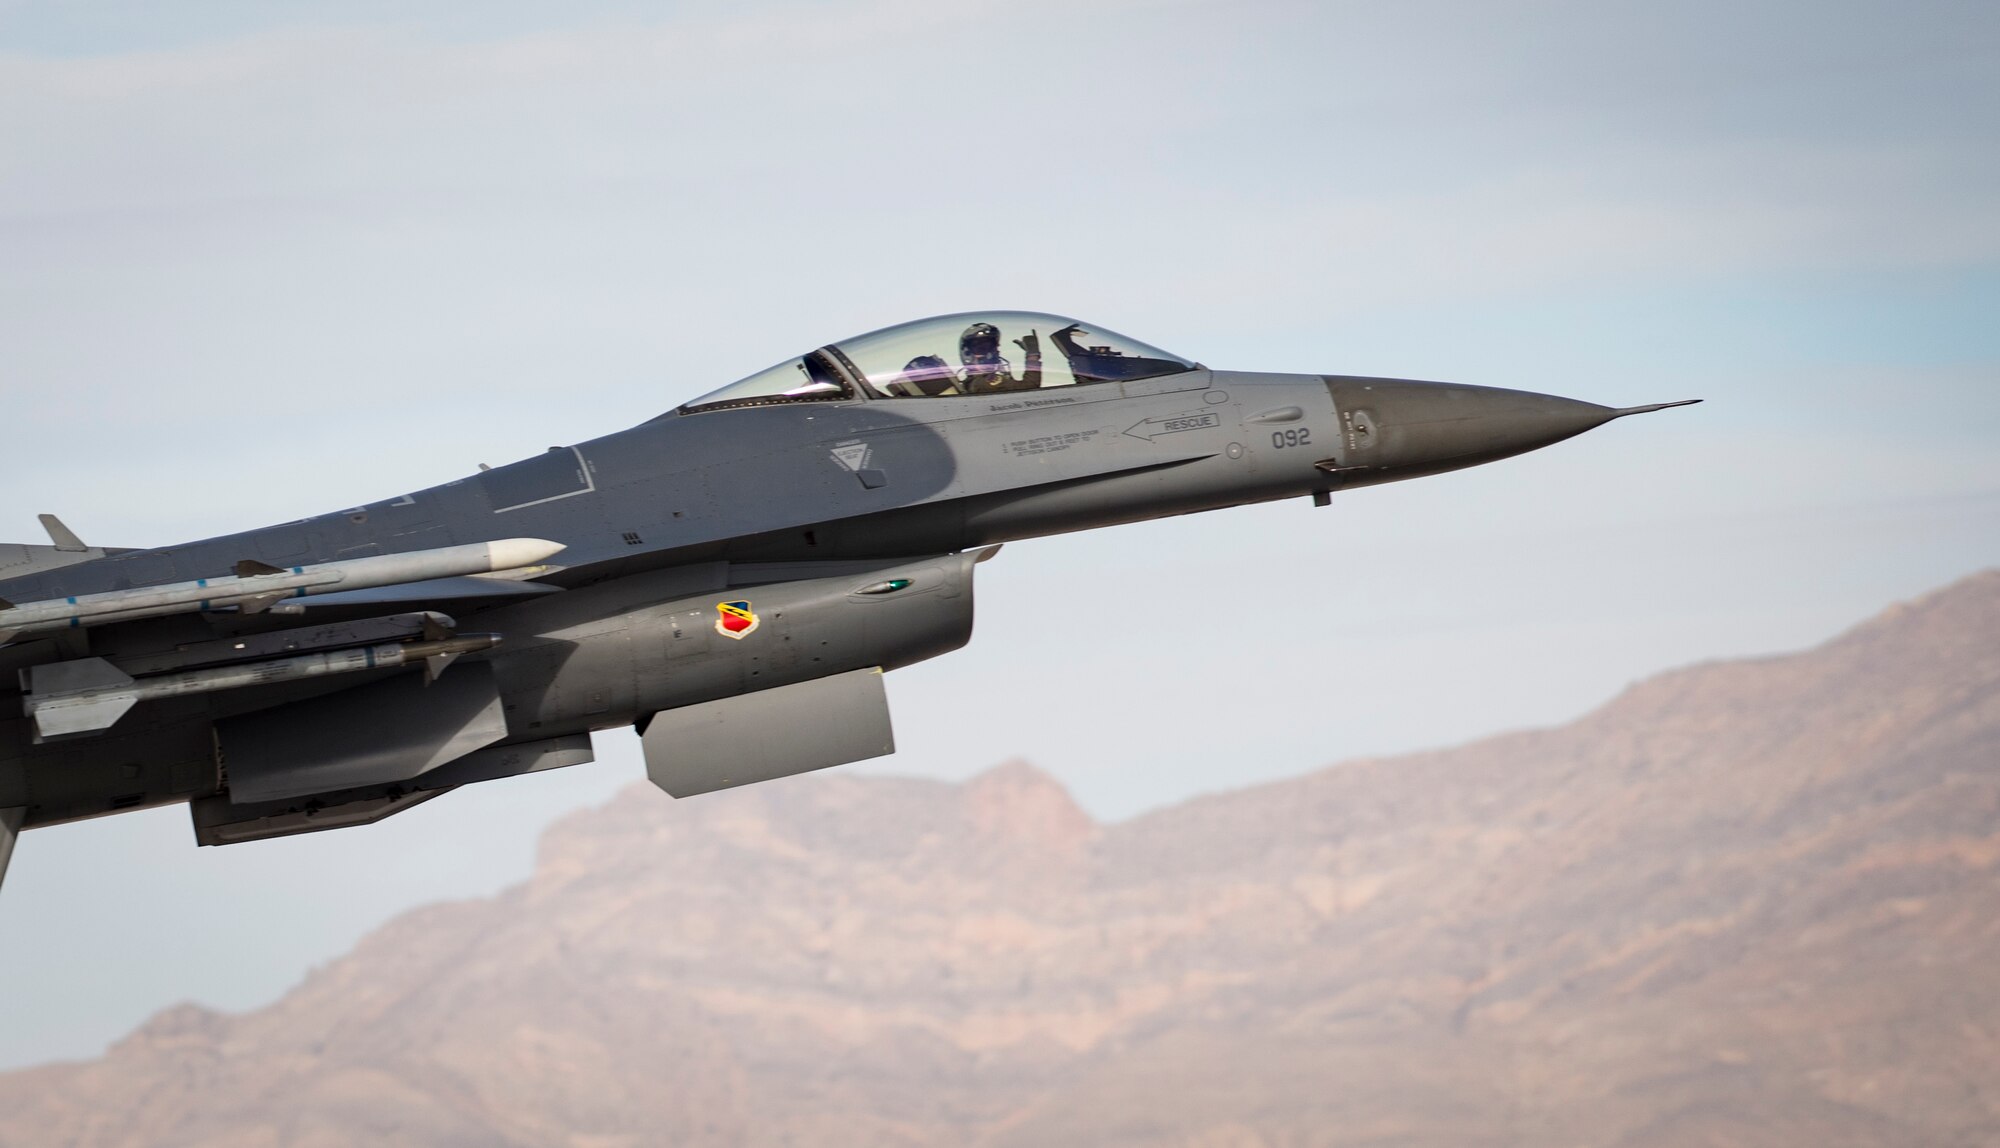 An F-16 Fighting Falcon fighting jet pilot signals after taking off from Nellis Air Force Base, Nevada Dec. 4, 2018. The F-16 is a compact, multi-role fighter aircraft. (U.S. Air Force photo by Airman 1st Class Bryan T. Guthrie)